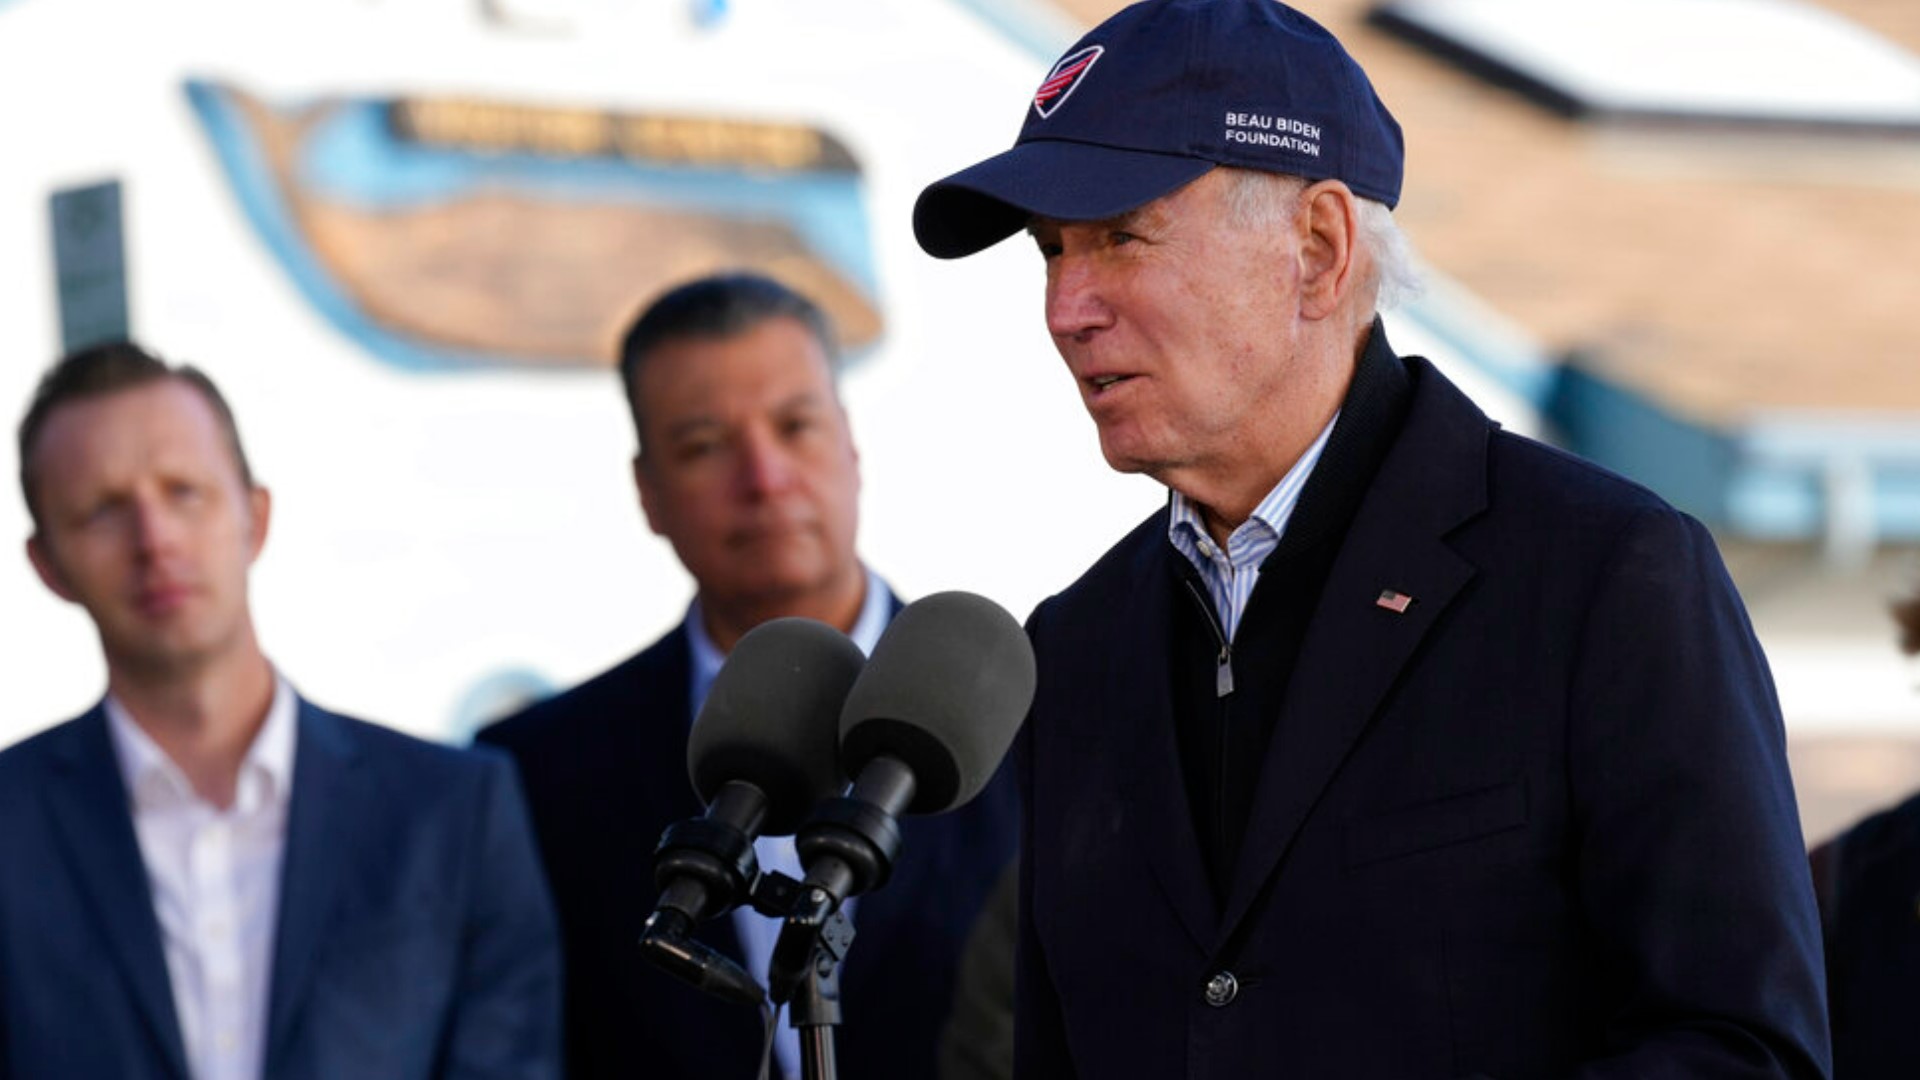 “We know some of the destruction is going to take years to rebuild,” Biden said. “But we've got to not just rebuild, but rebuild better."